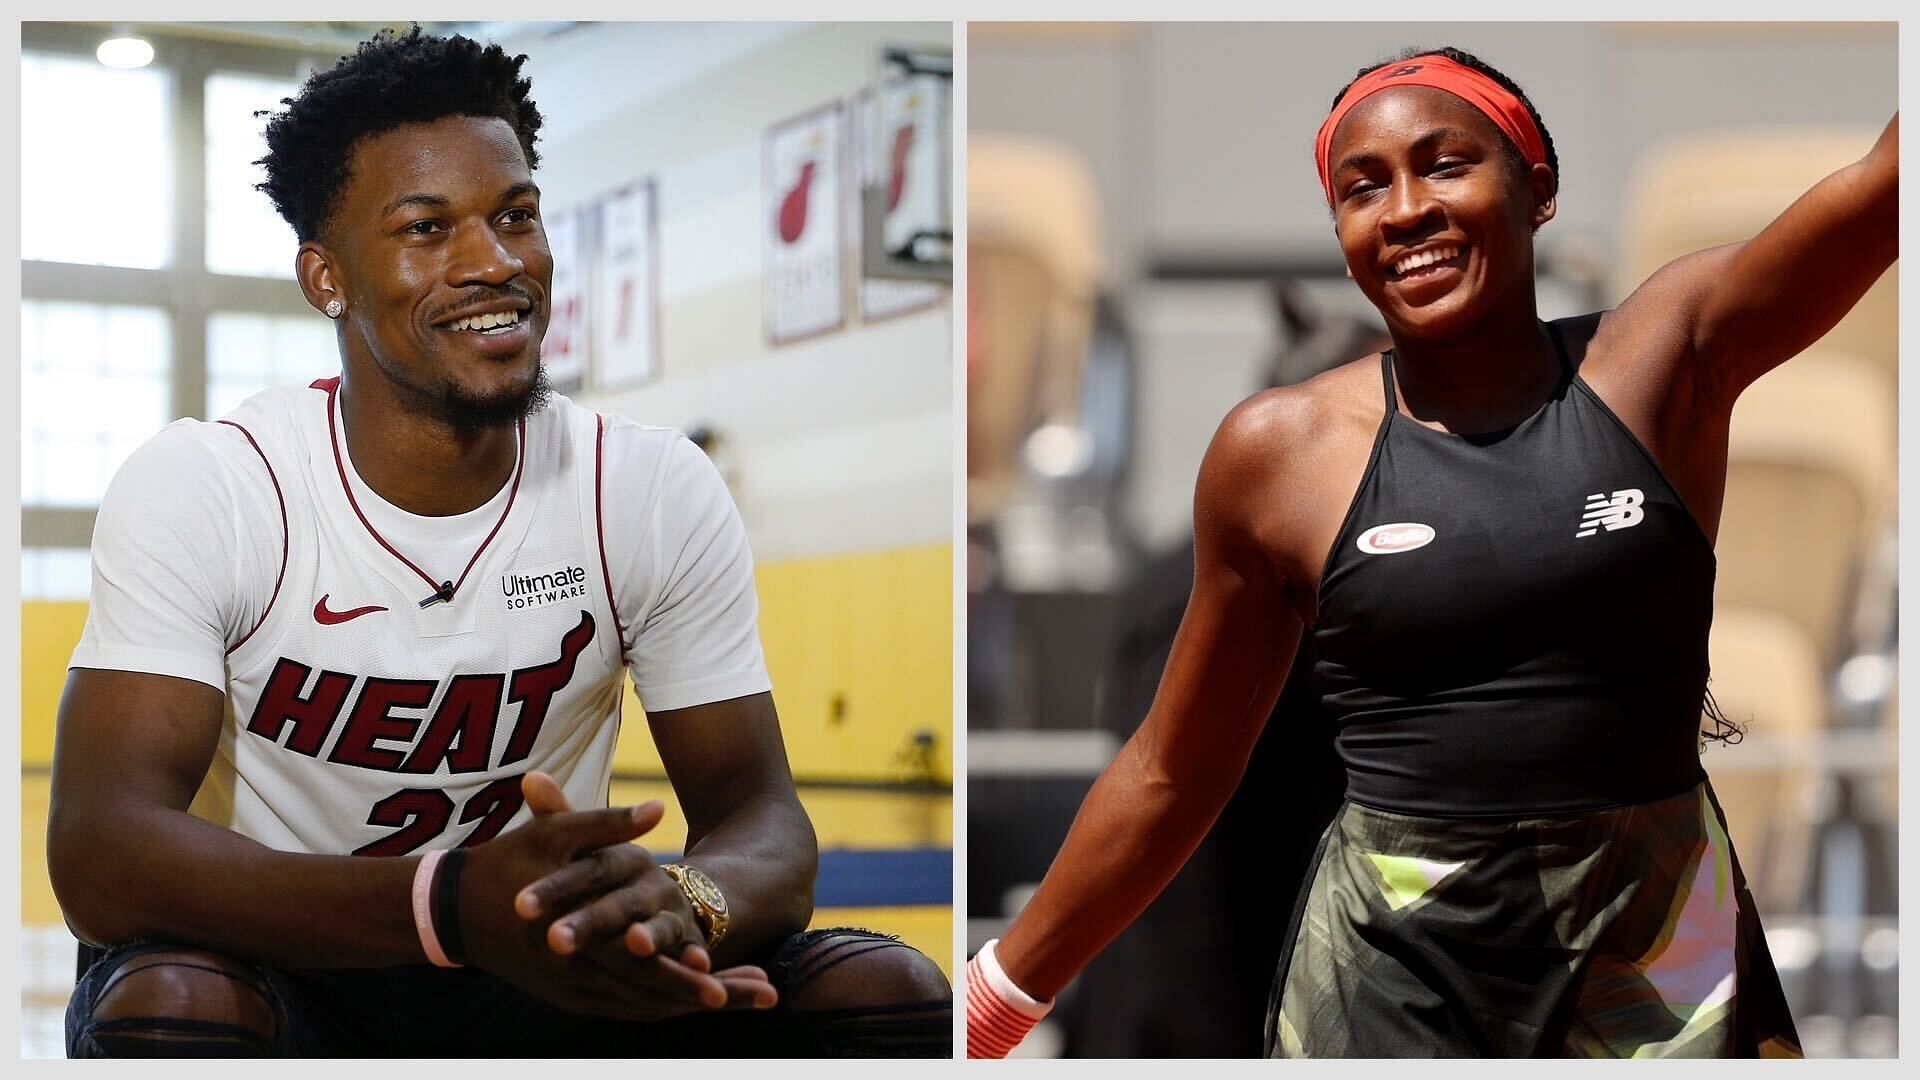 Jimmy Butler of NBA Side Miami Heat and Coco Gauff World No. 3 Ranked Tennis Player